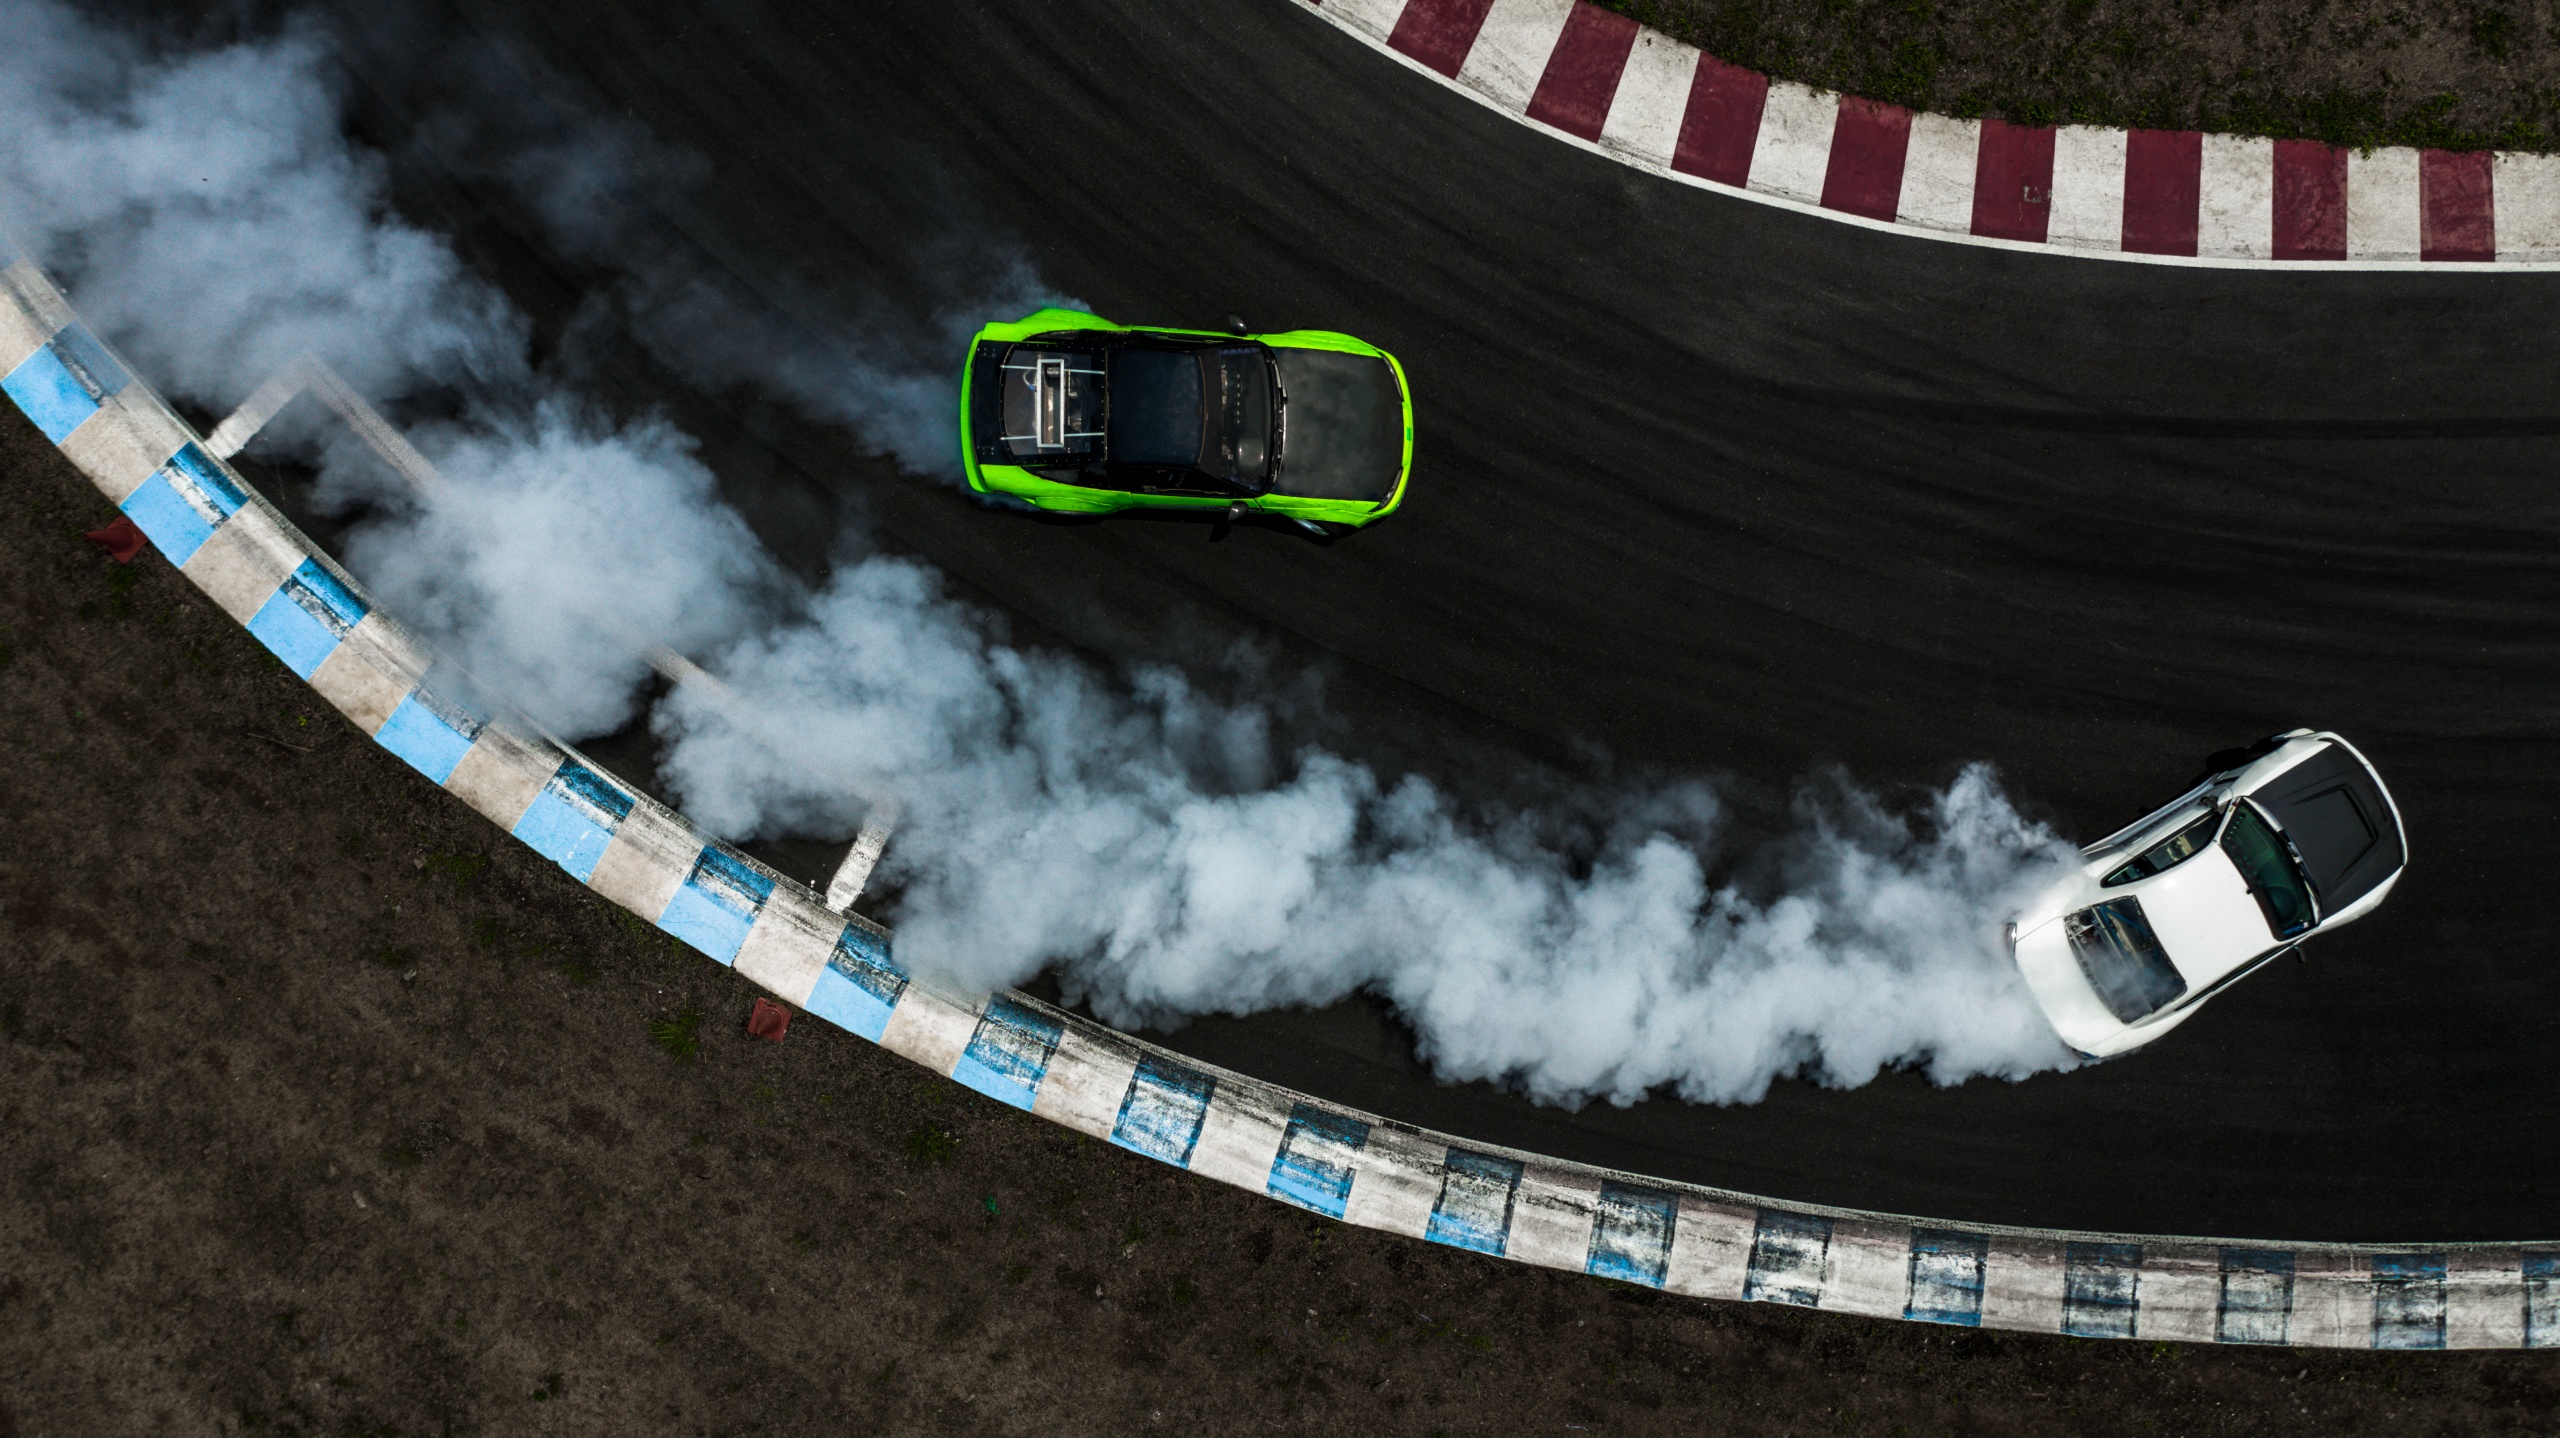 Two cars drifting battle on race track with smoke, Aerial view two